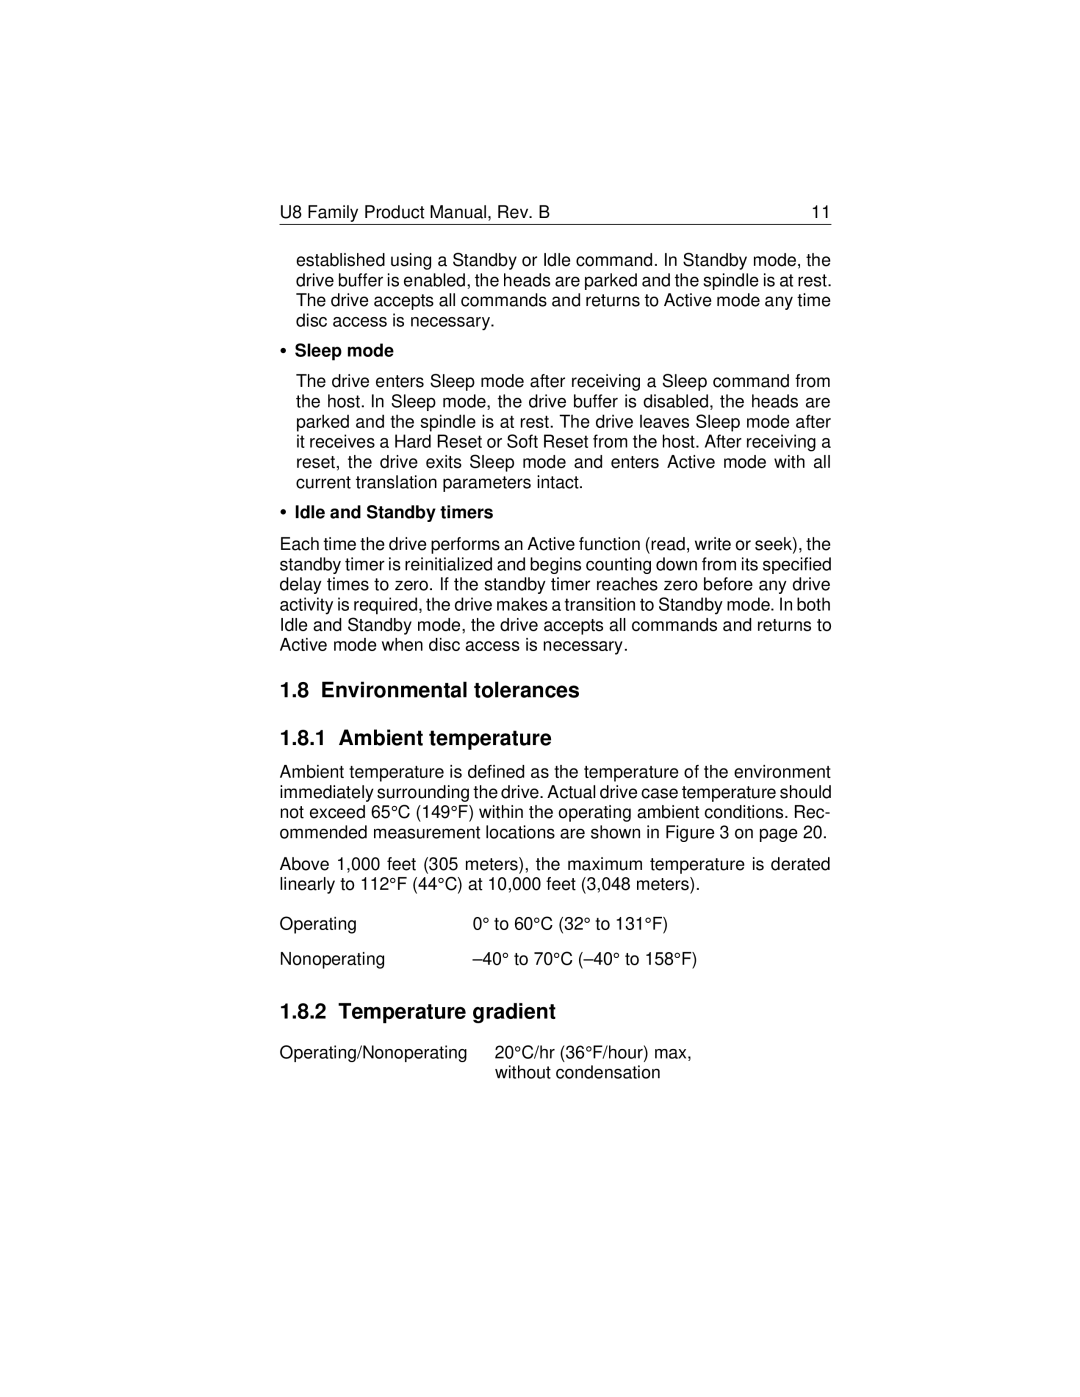 HP 6641 (LA) Environmental tolerances 1.8.1 Ambient temperature, Temperature gradient, Sleep mode, Idle and Standby timers 